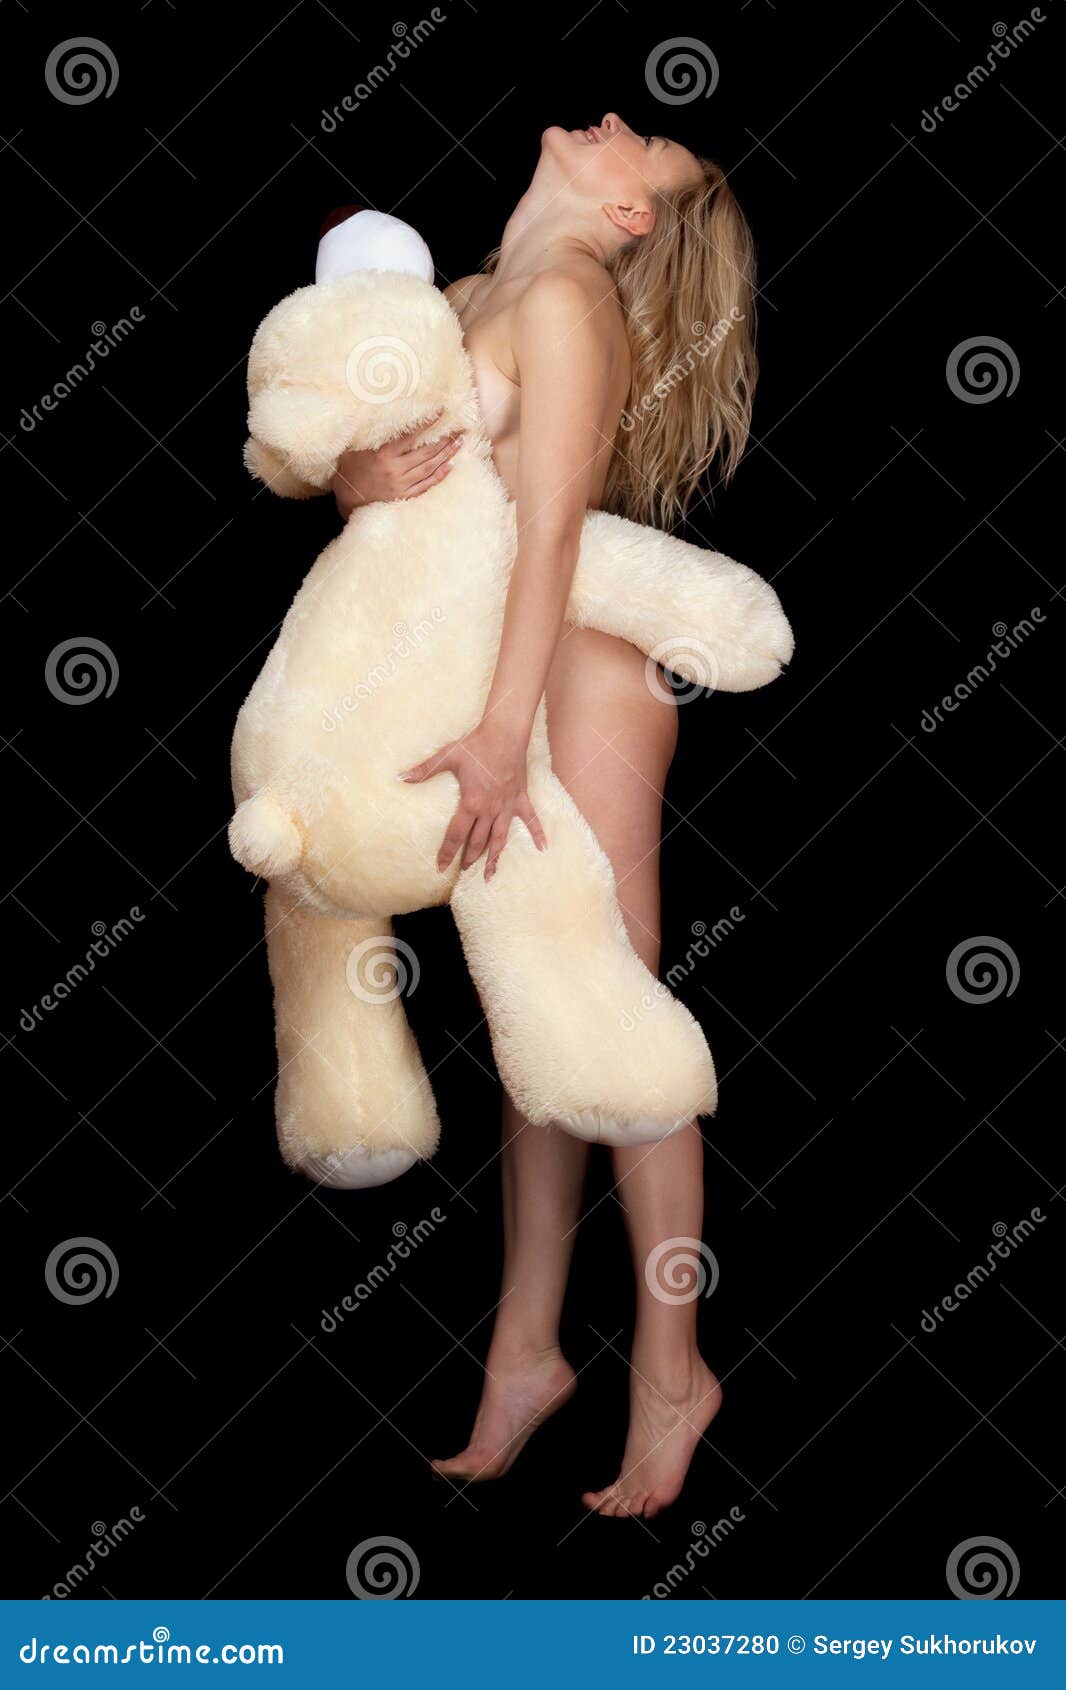 Naked Models With Teddy Bears